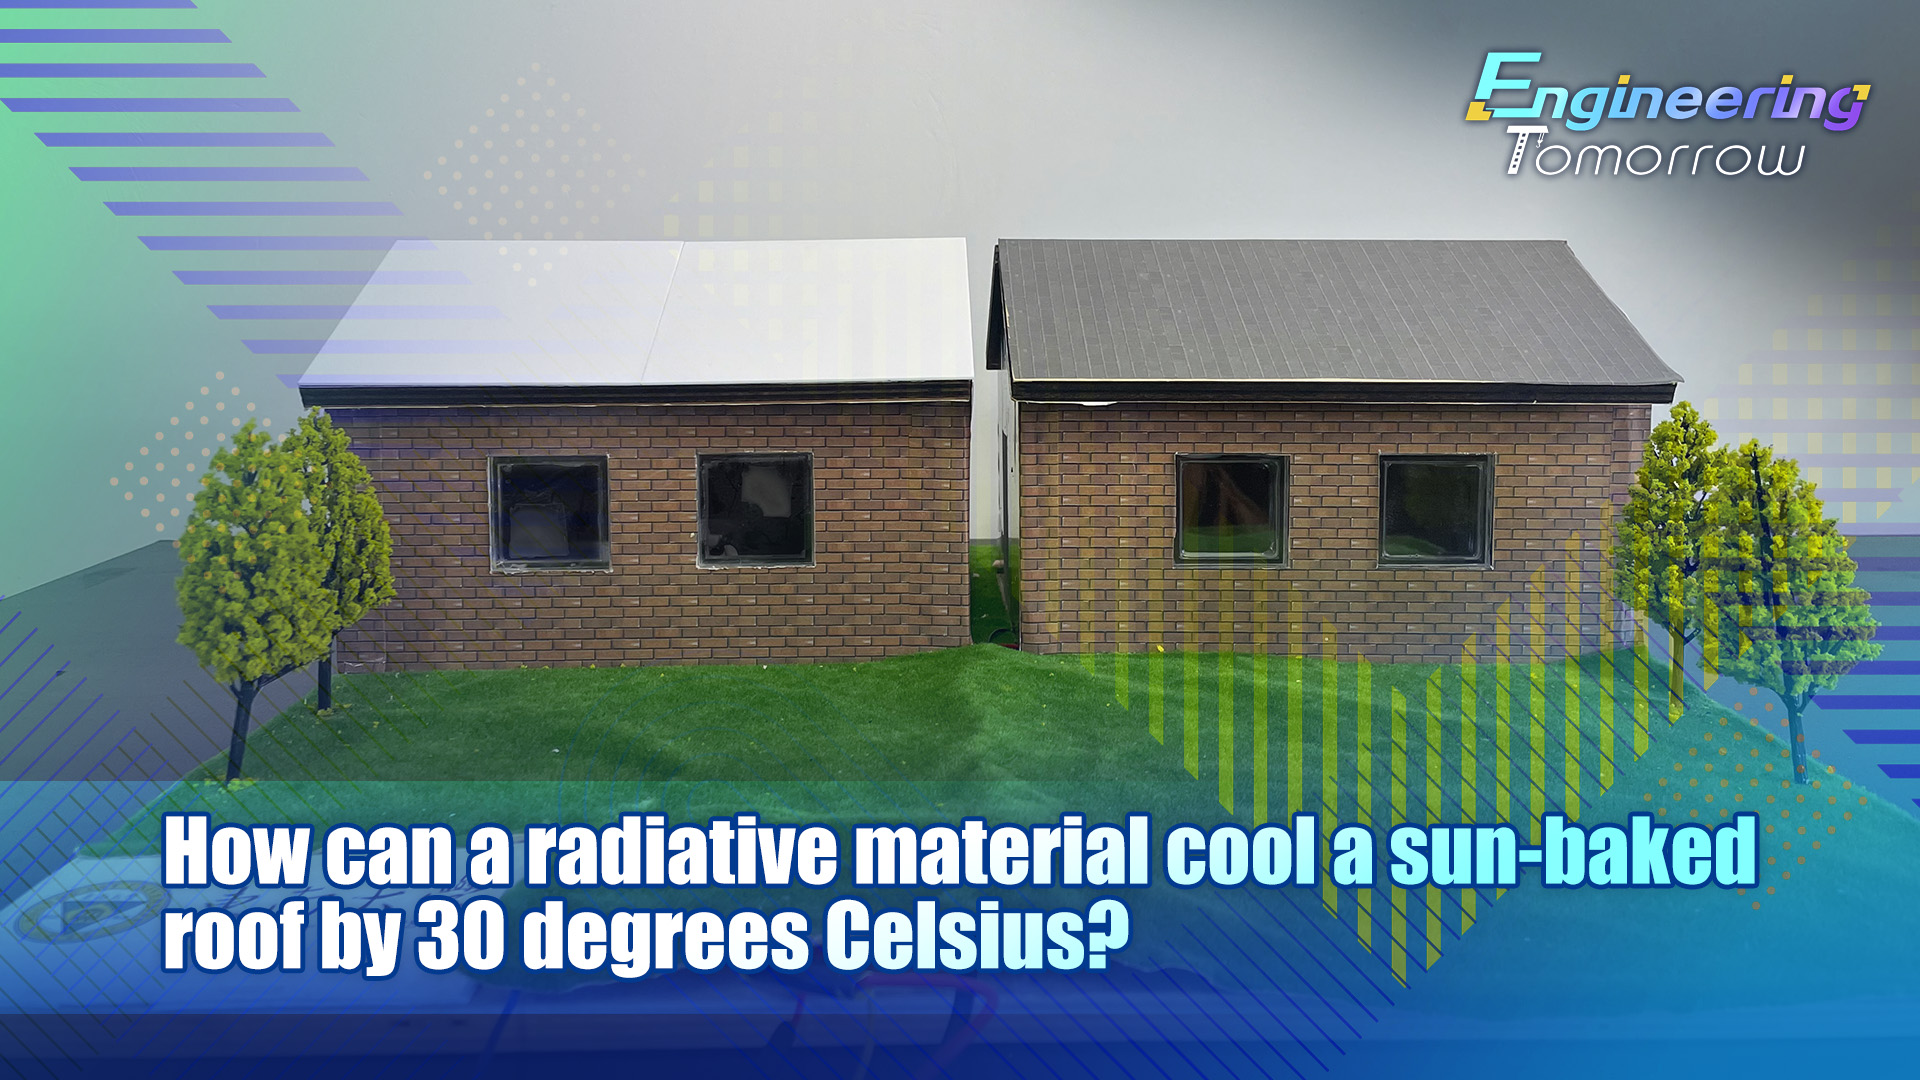 How can a radiative material cool a sun-baked roof by 30 degrees Celsius?